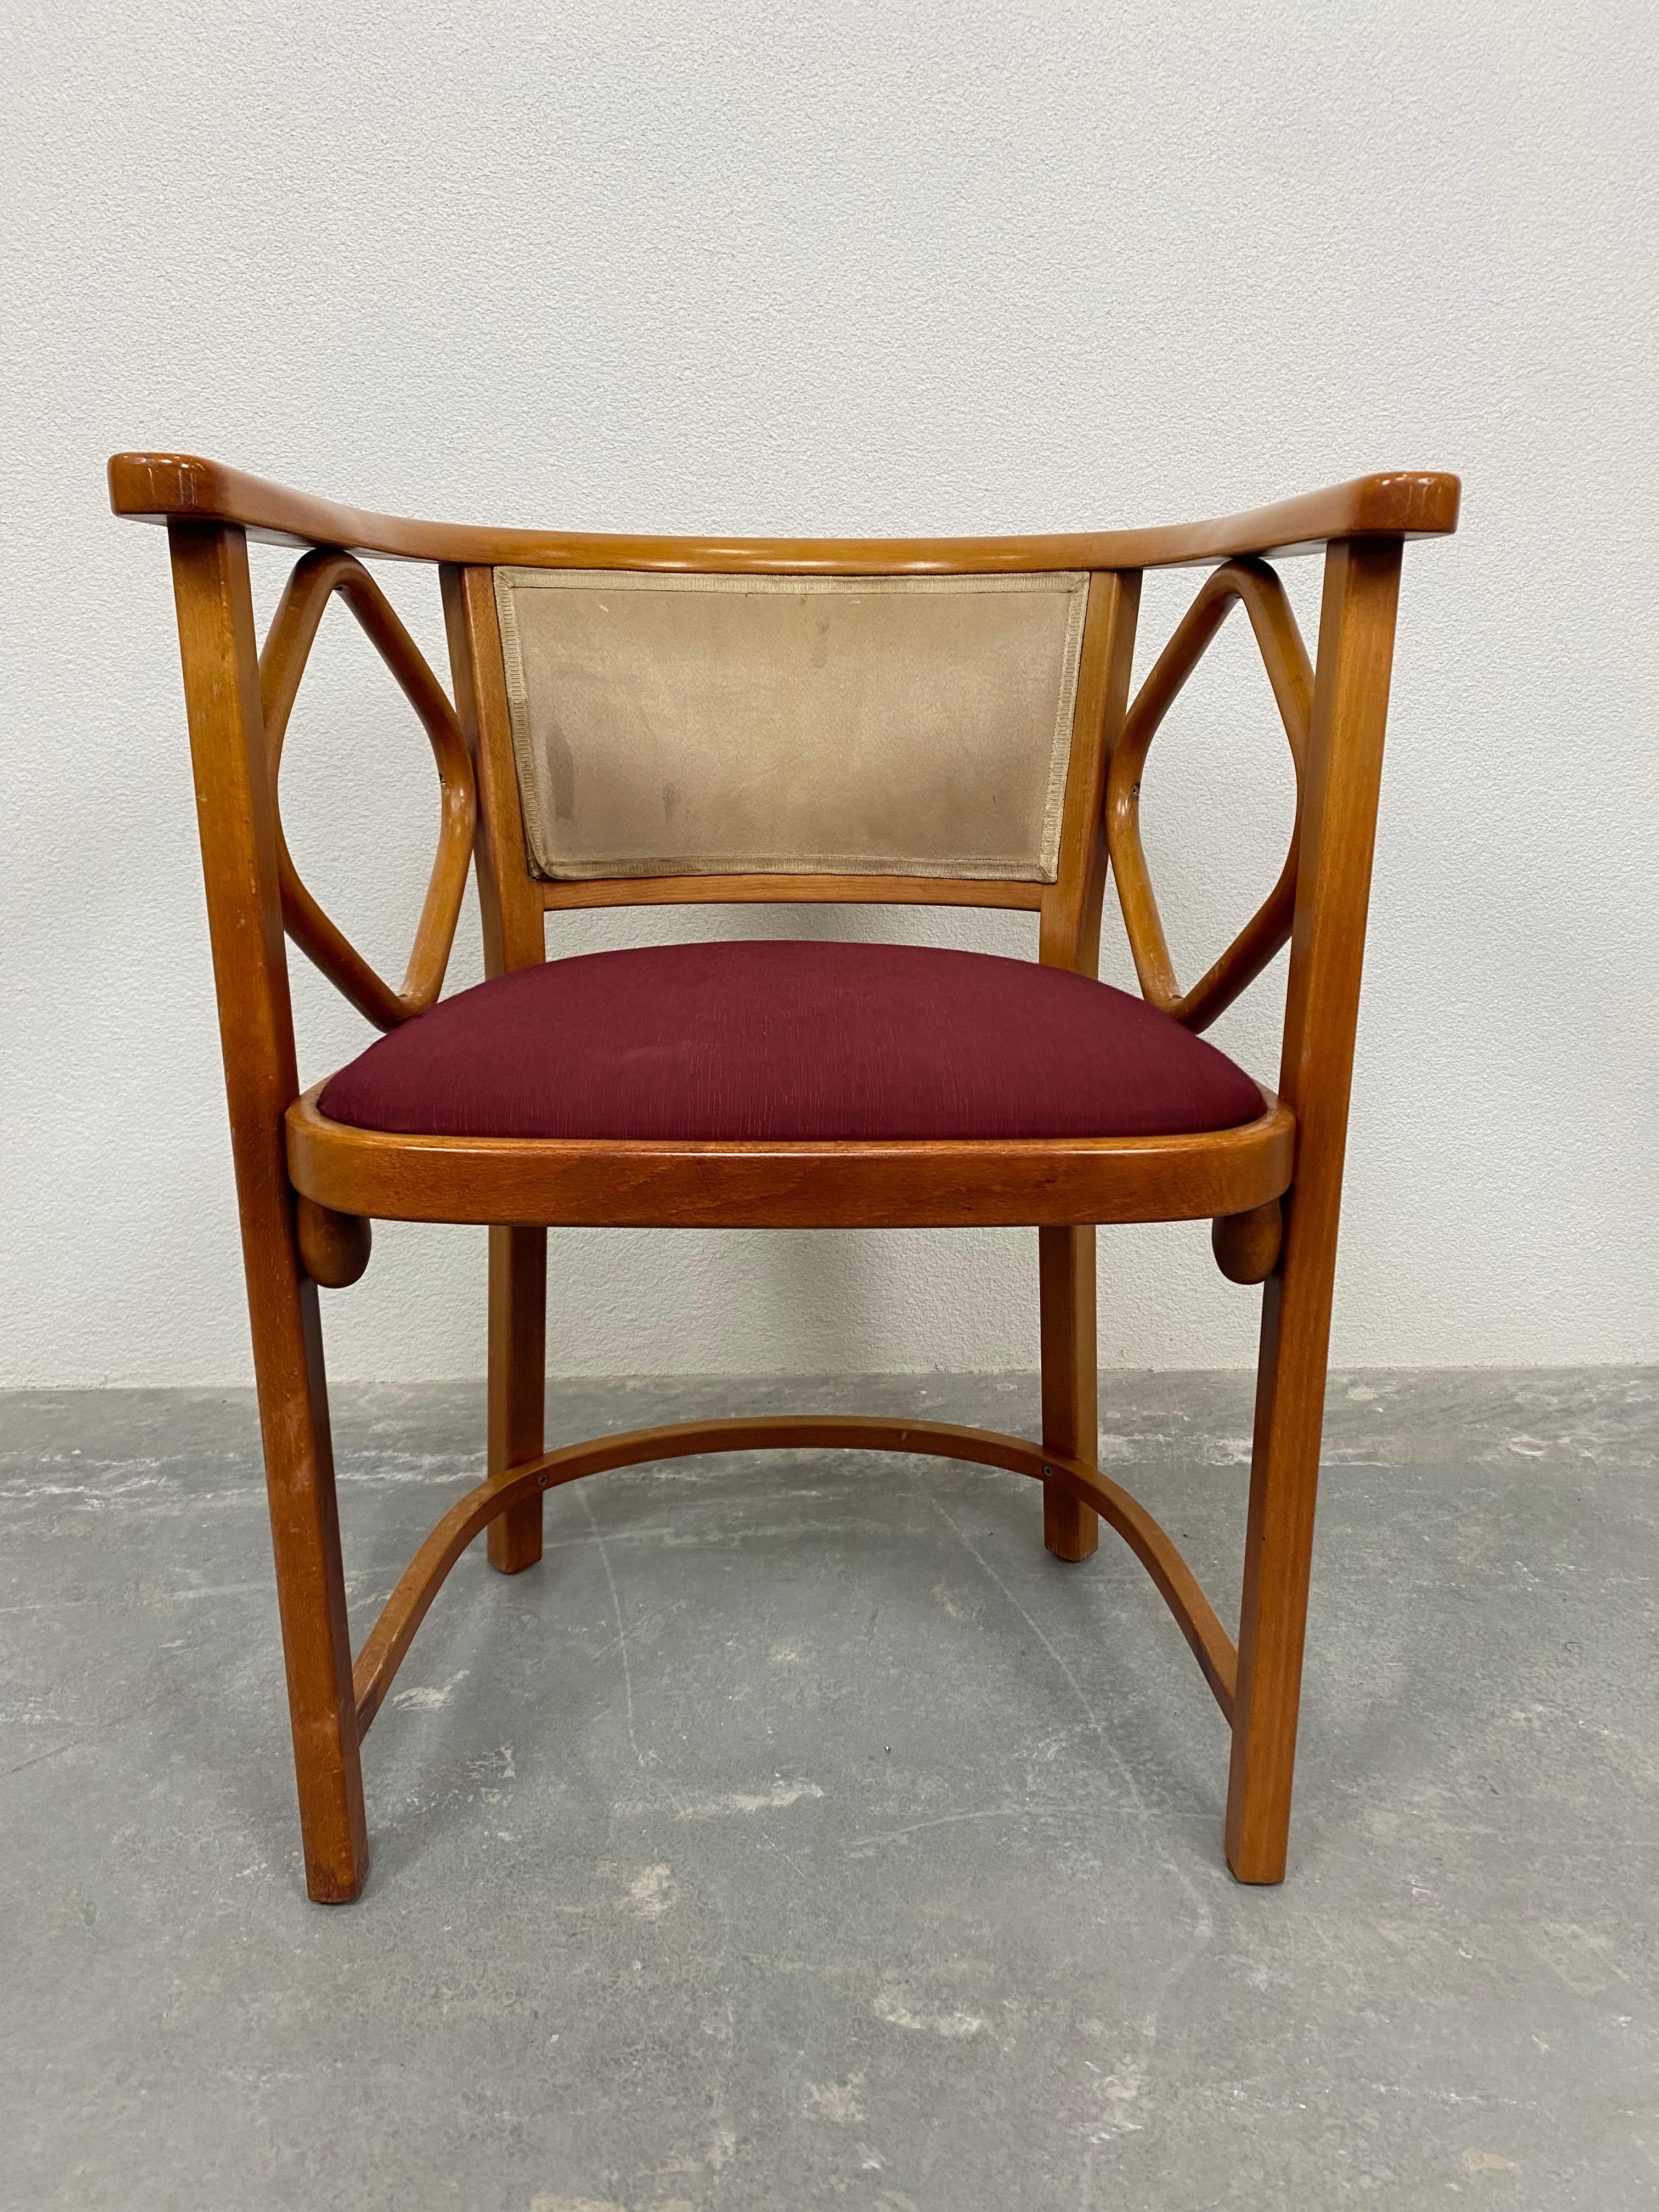 Vienna Secession Set of 4 Fledermaus Chairs Executed by Thonet For Sale